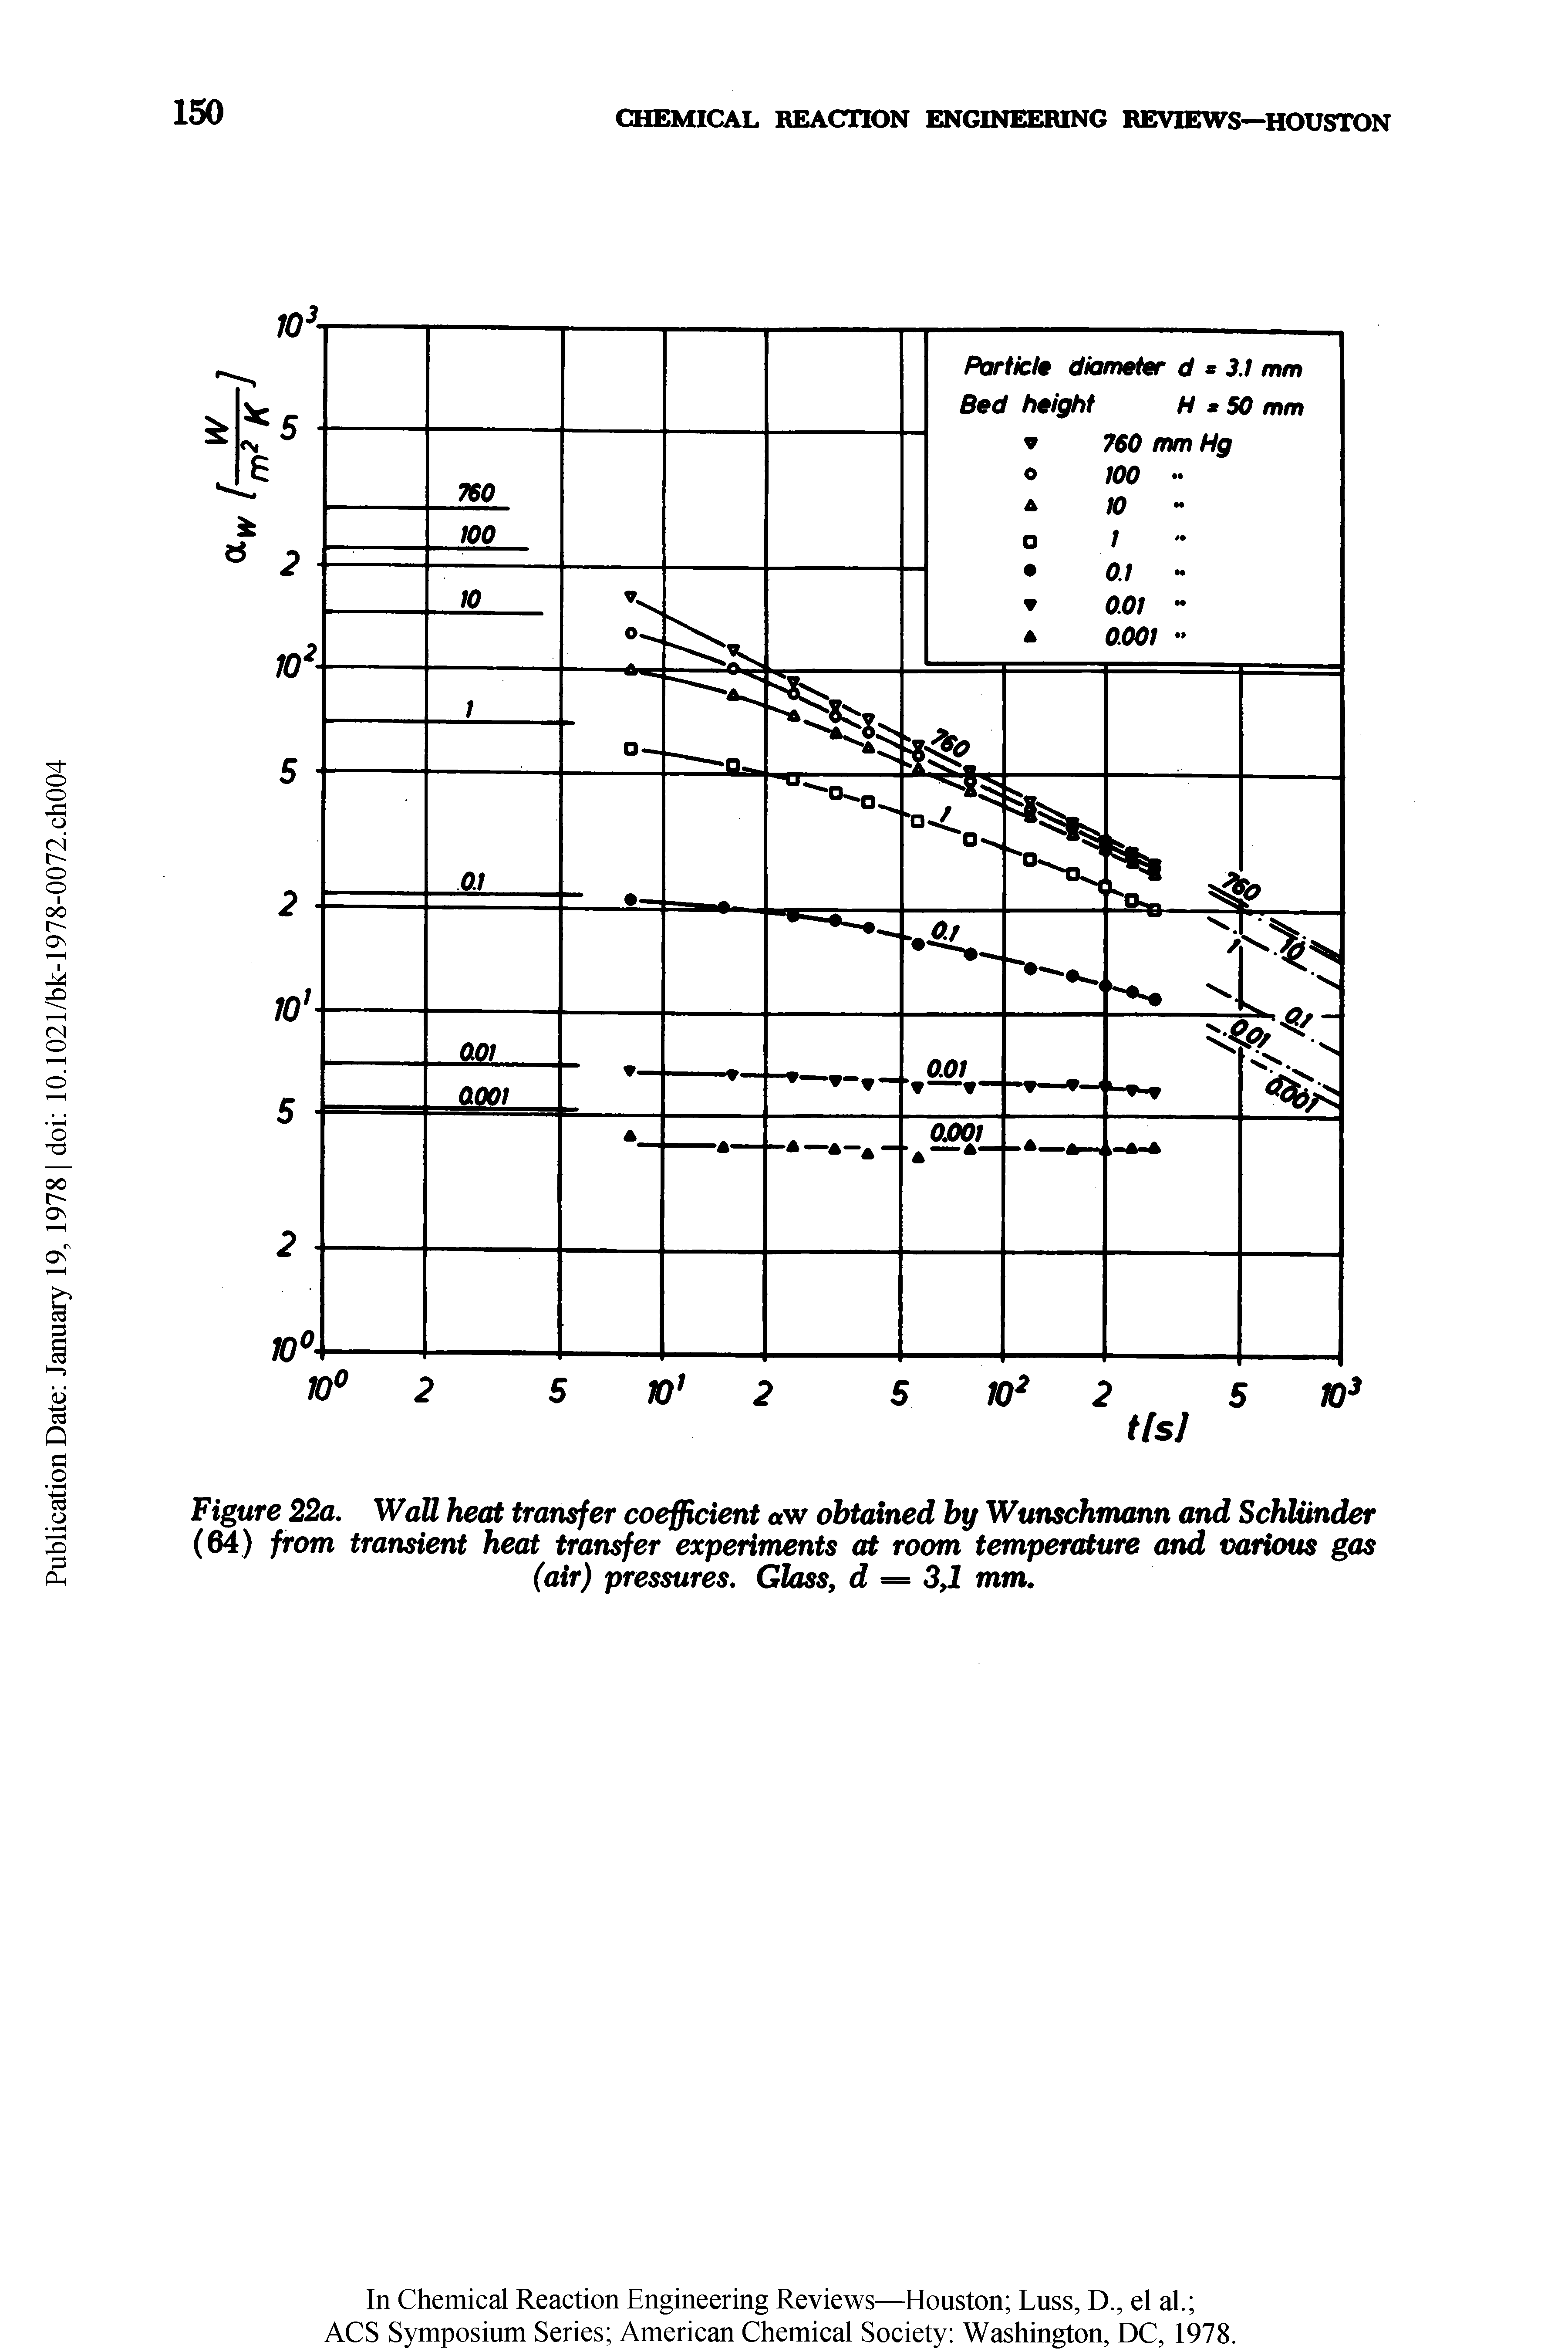 Figure 22a, Wall heat transfer coefficient w obtained by Wunschmann and Schlunder (64) from transient heat transfer experiments at room temperature and various gas (air) pressures. Glass, d = 3,1 mm.